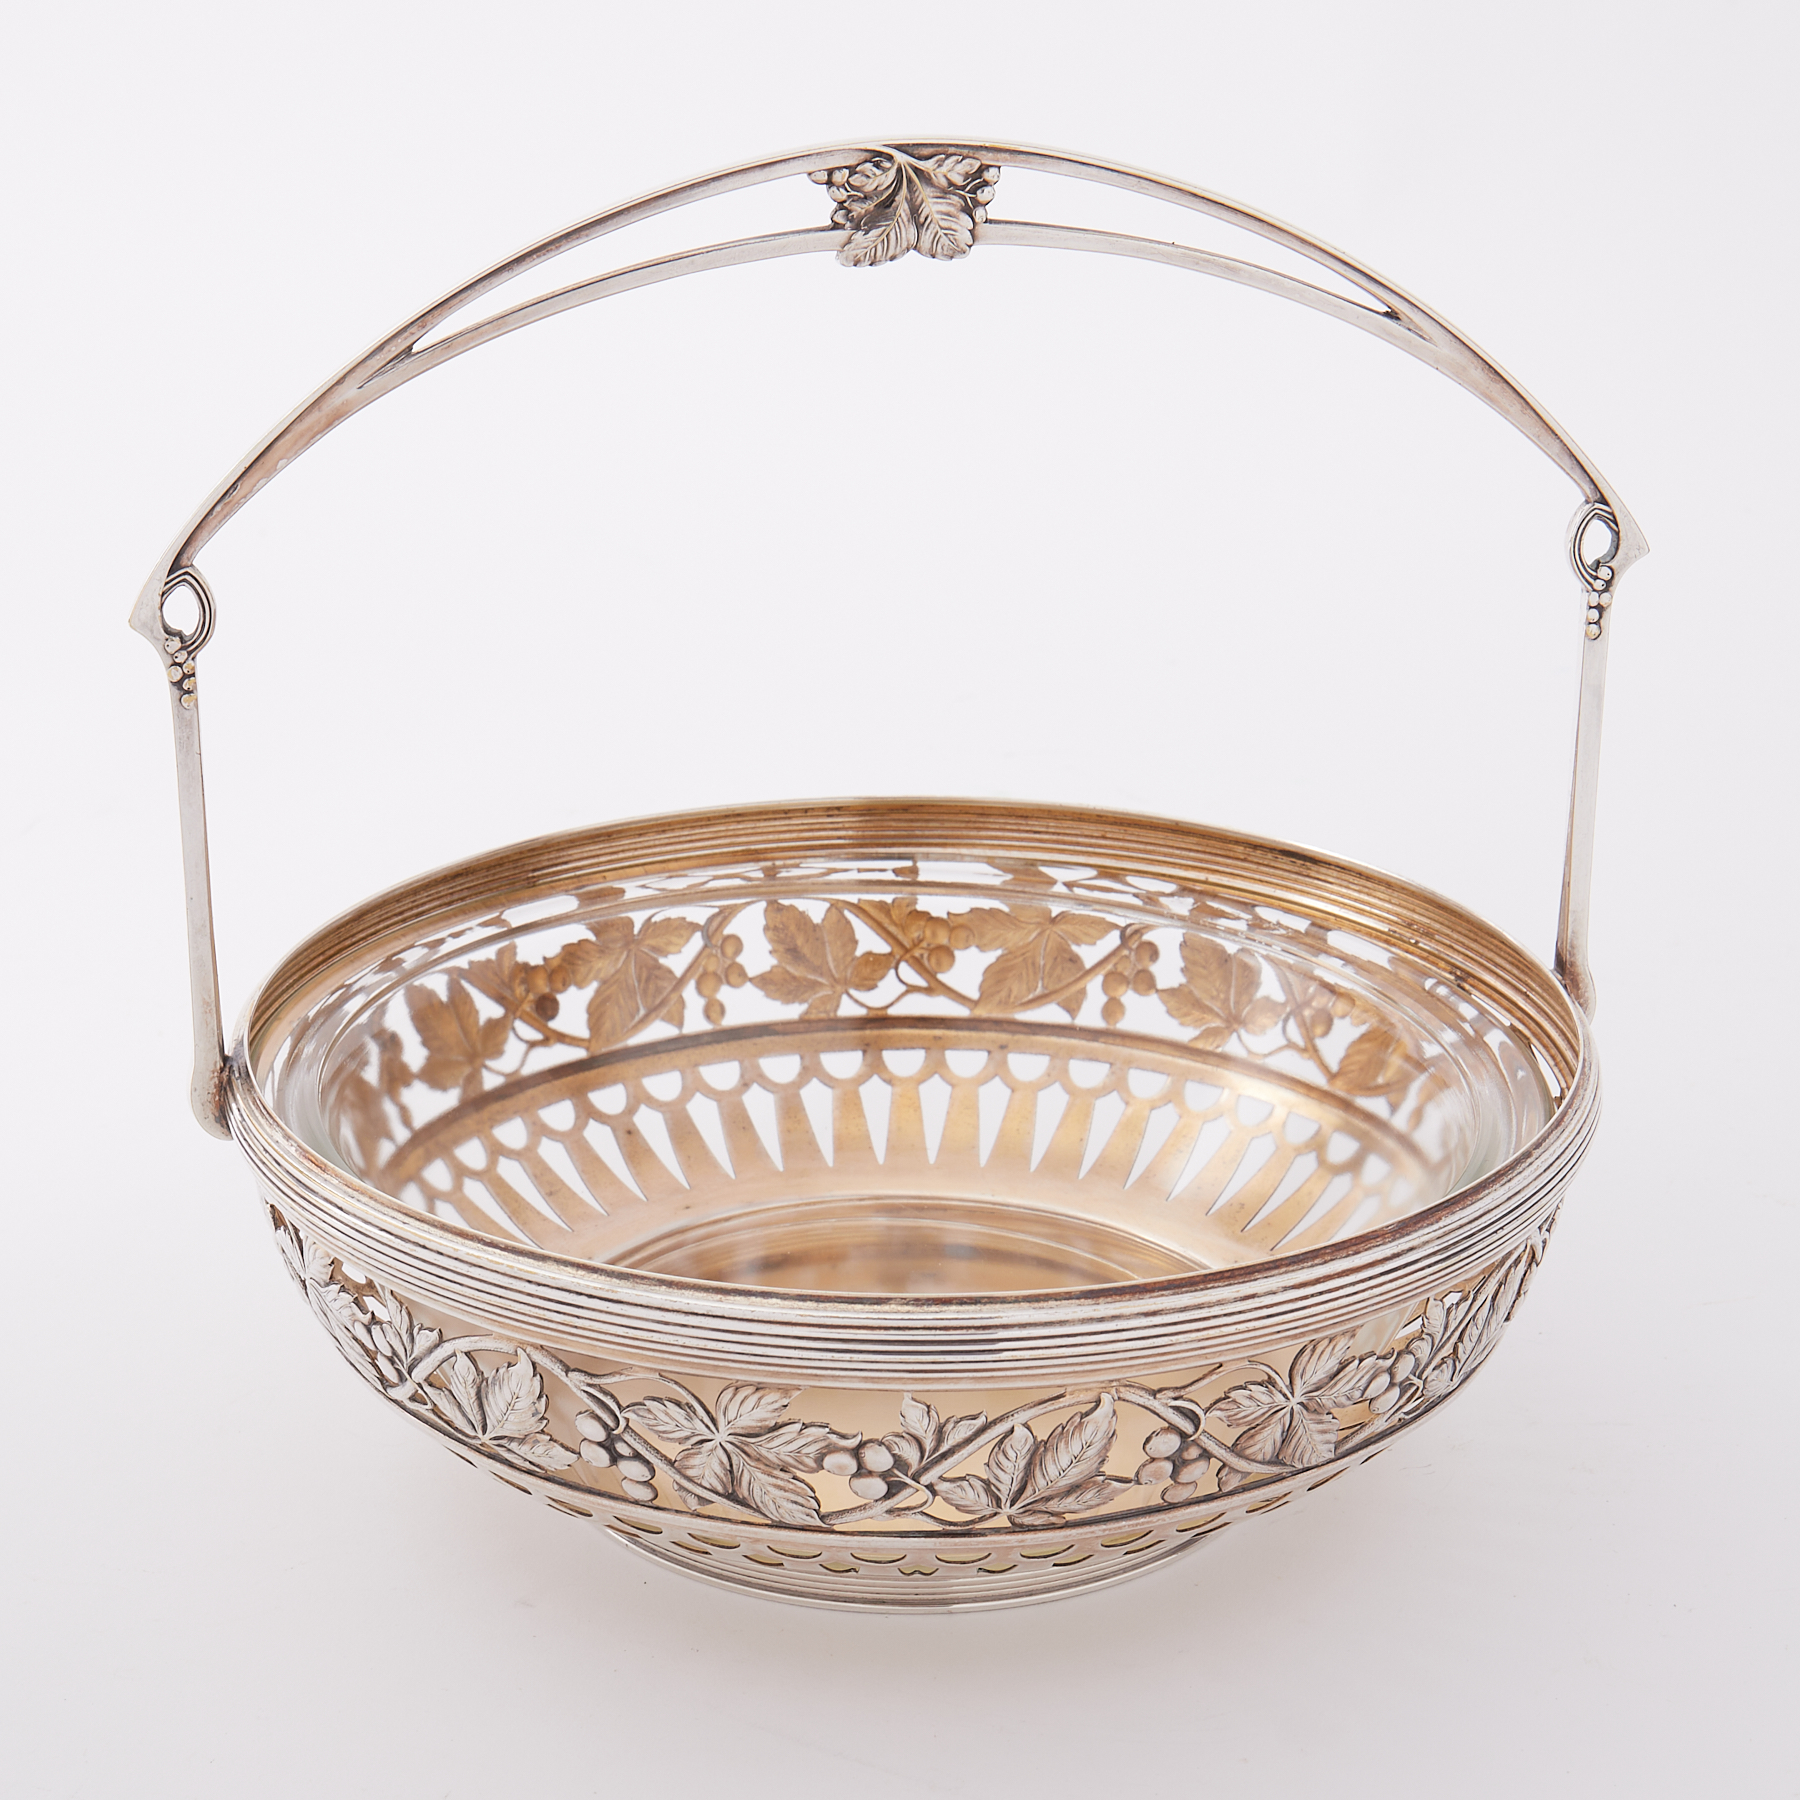 WMF silver plated pierced fruit basket decorated with vines.